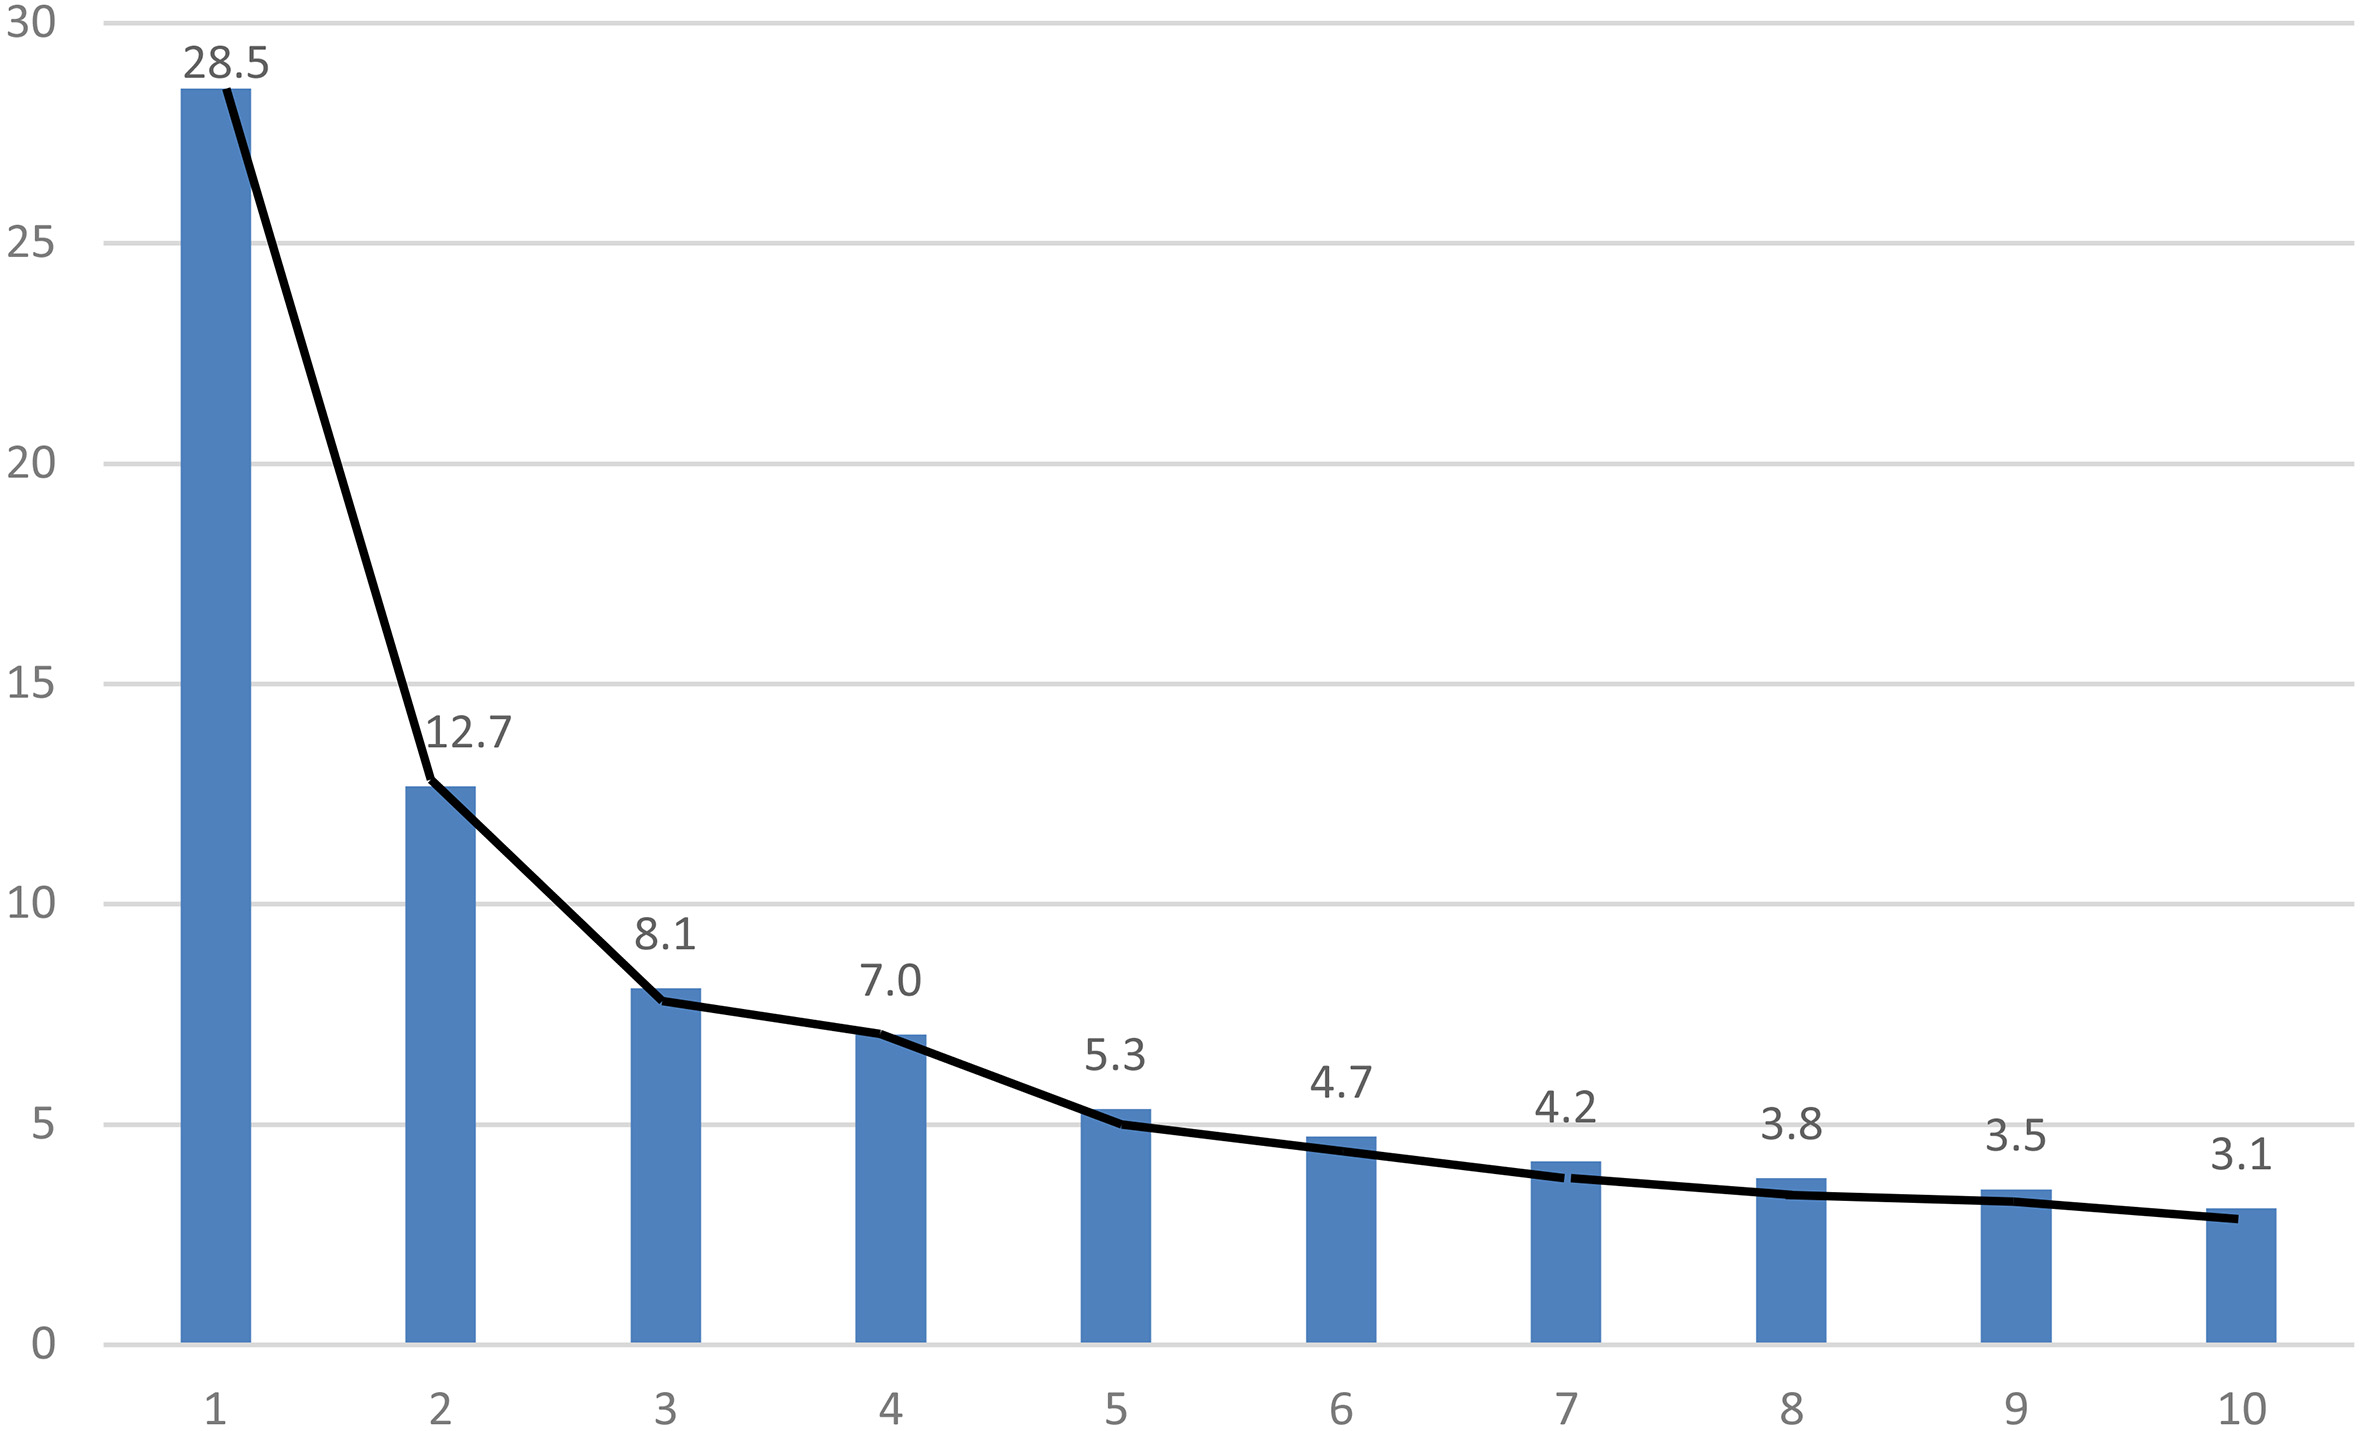 Percentage of variance explained by each principal component (%). Source: Eurostat; authors’ calculations. Only the 10 first principal components are represented on this figure. The % of variability explained by each principal component is obtained by dividing the eigenvalue for this component by the sum of all eigenvalues.